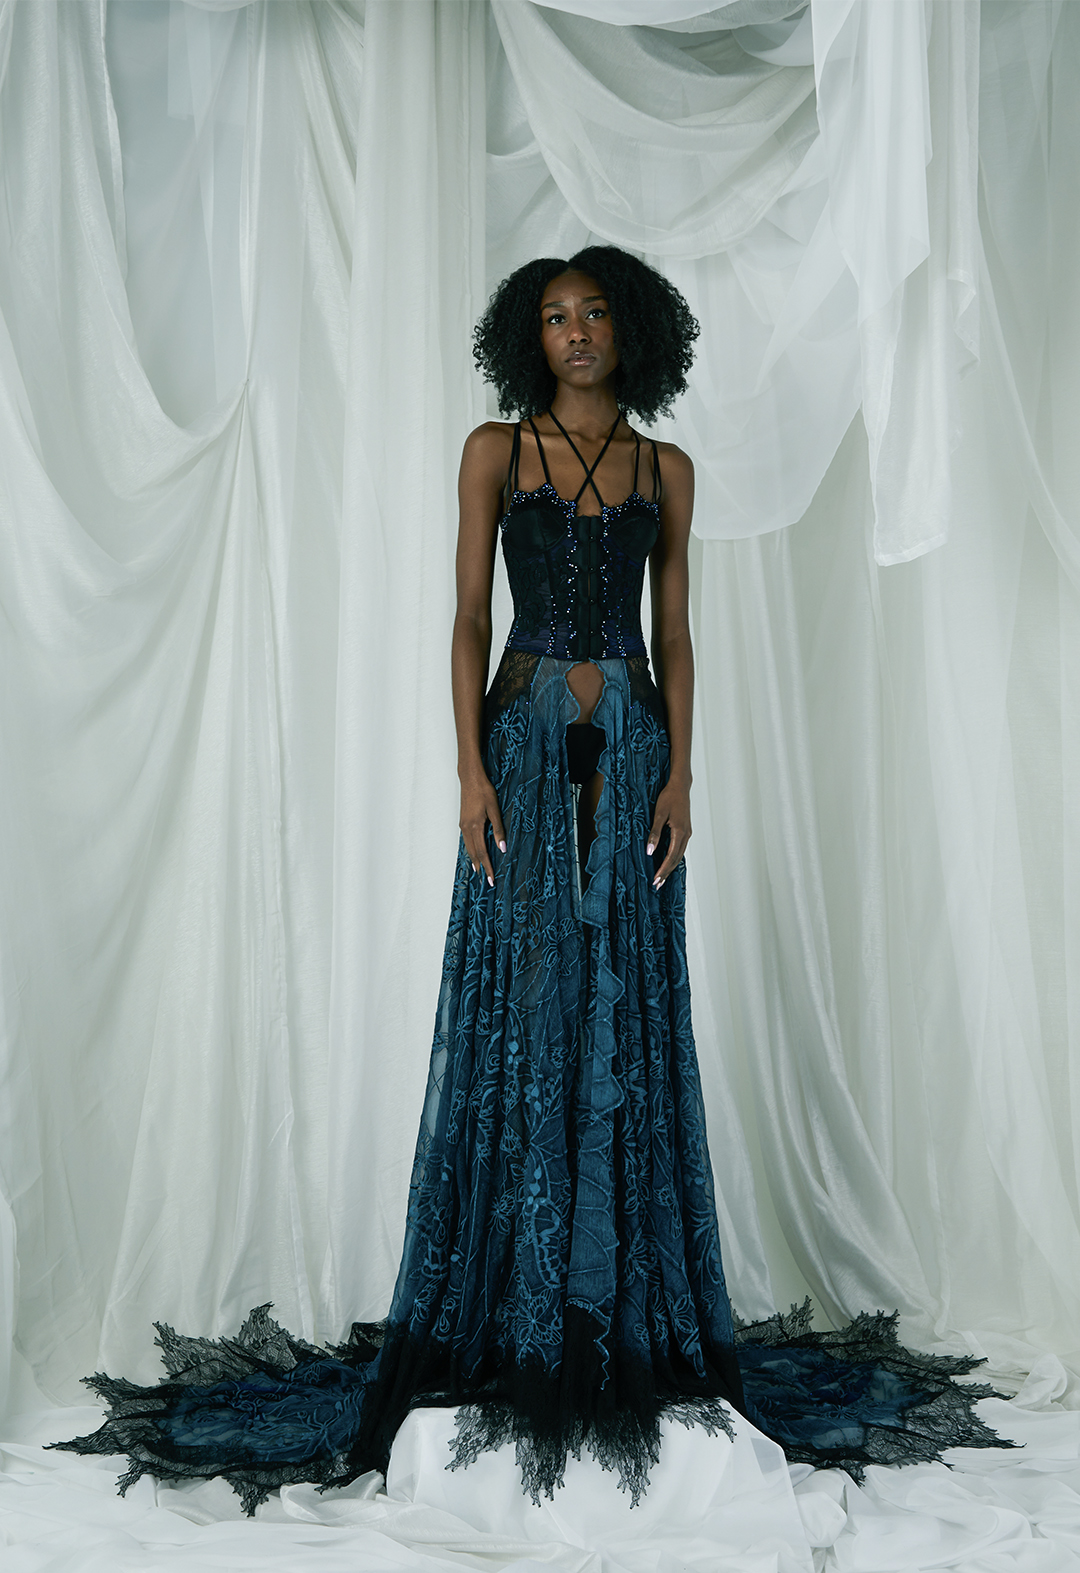 The corset is electric blue, with black lace, criss-crossed bra straps, and crystals. The skirt is blue with embroidered butterflies, crystals, and black lace appliqué hem.